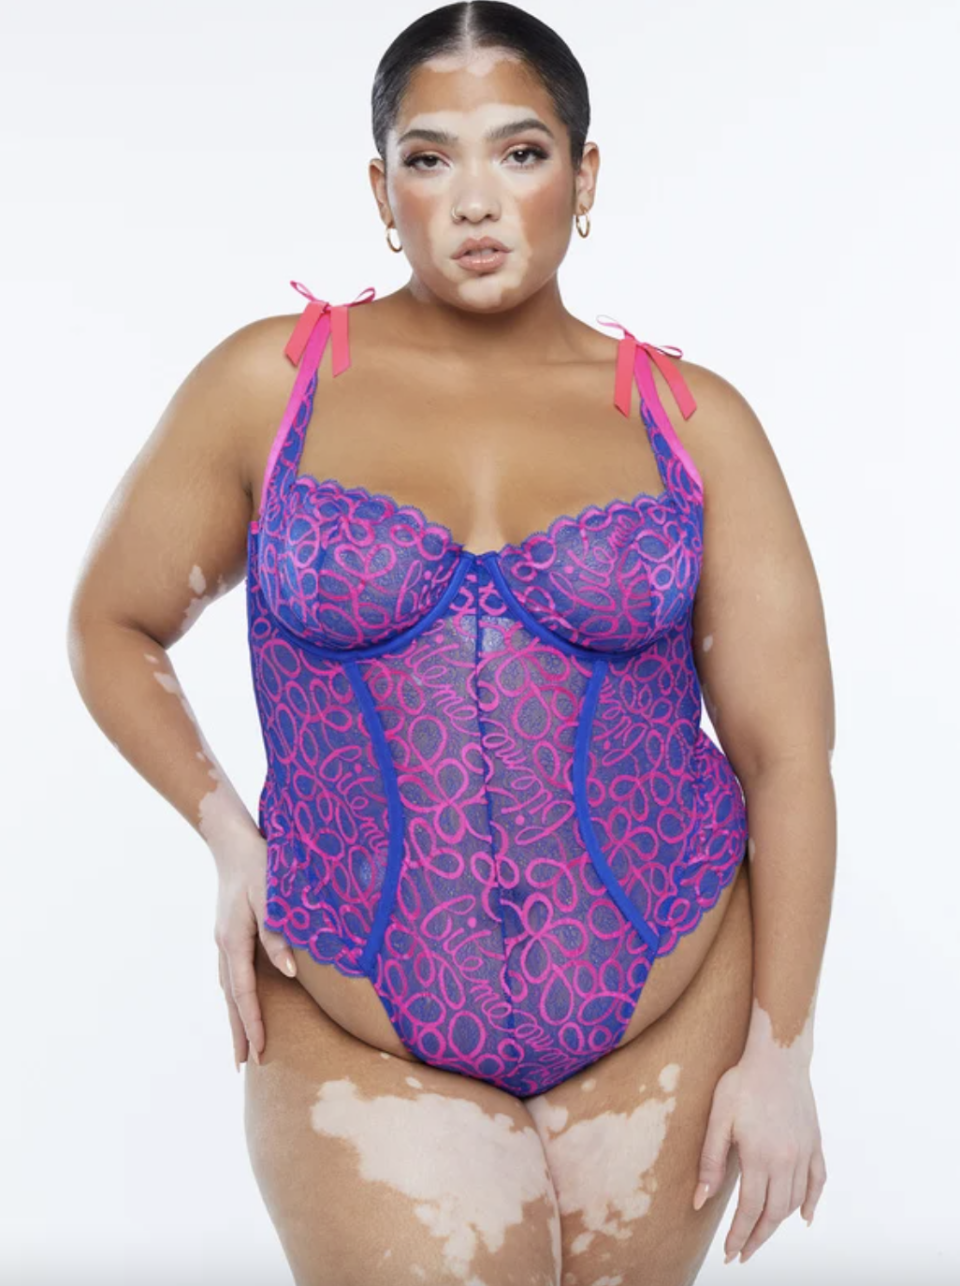 plus size model in Ribbon Writing Lace Teddy in purple and pink lace (Photo via Savage x Fenty)